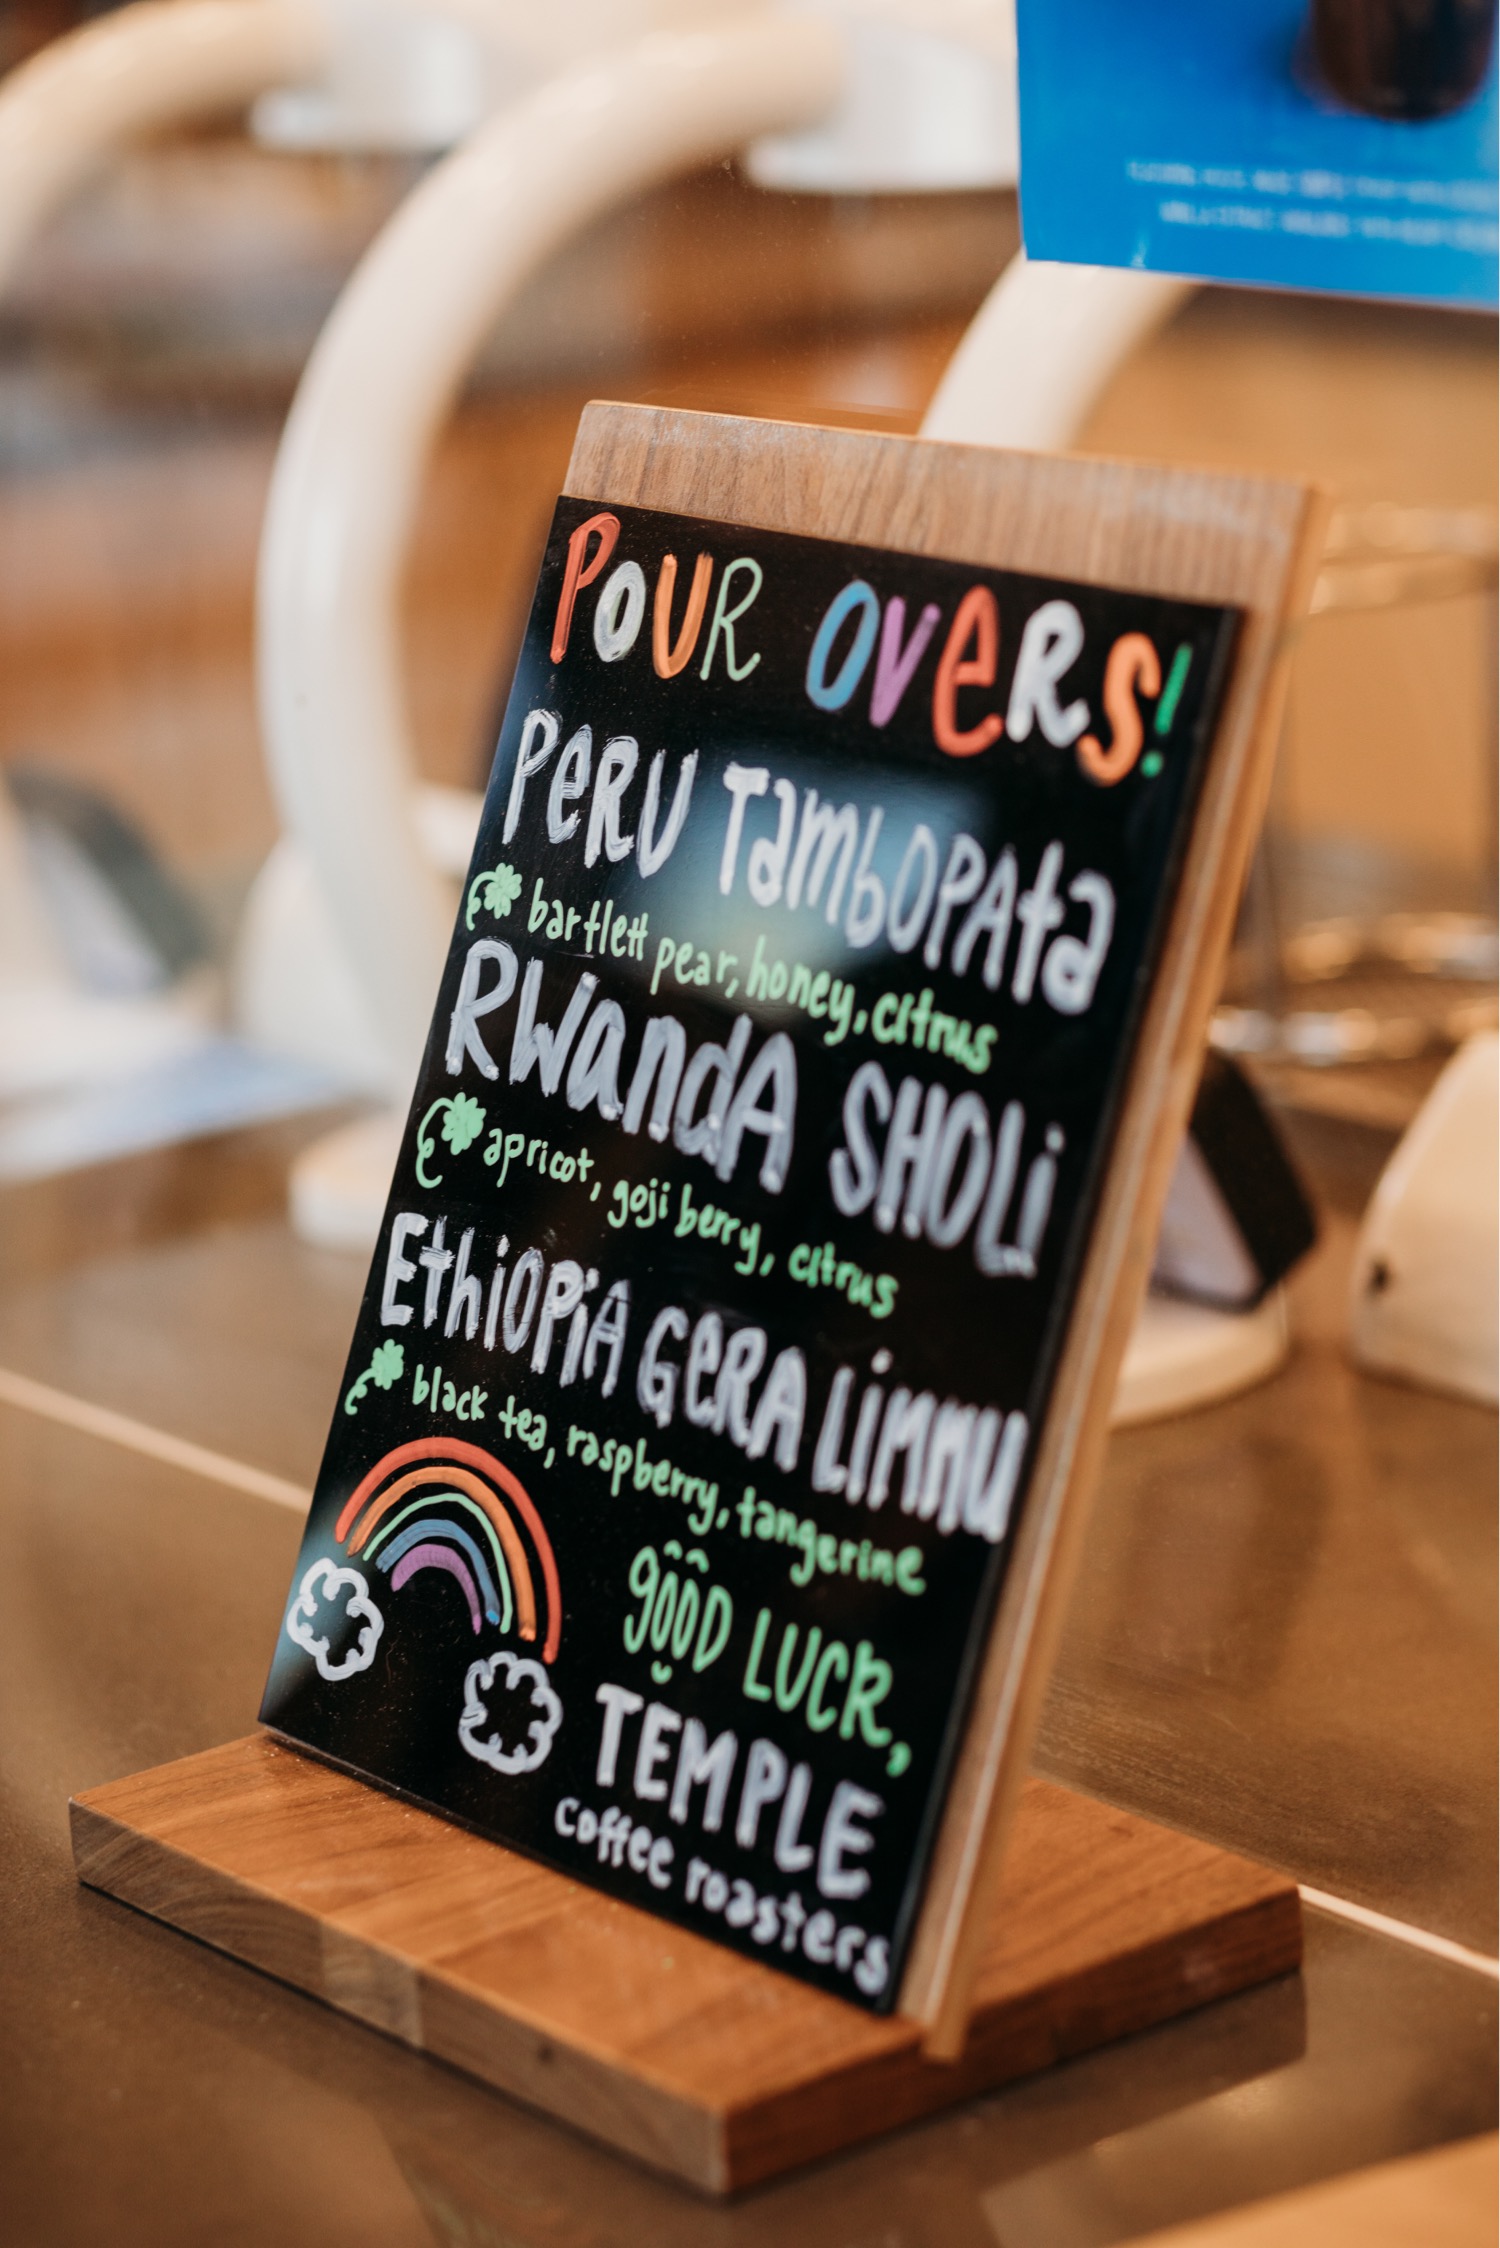 Sign describing the types of coffee sold in the coffee shop in Davis.